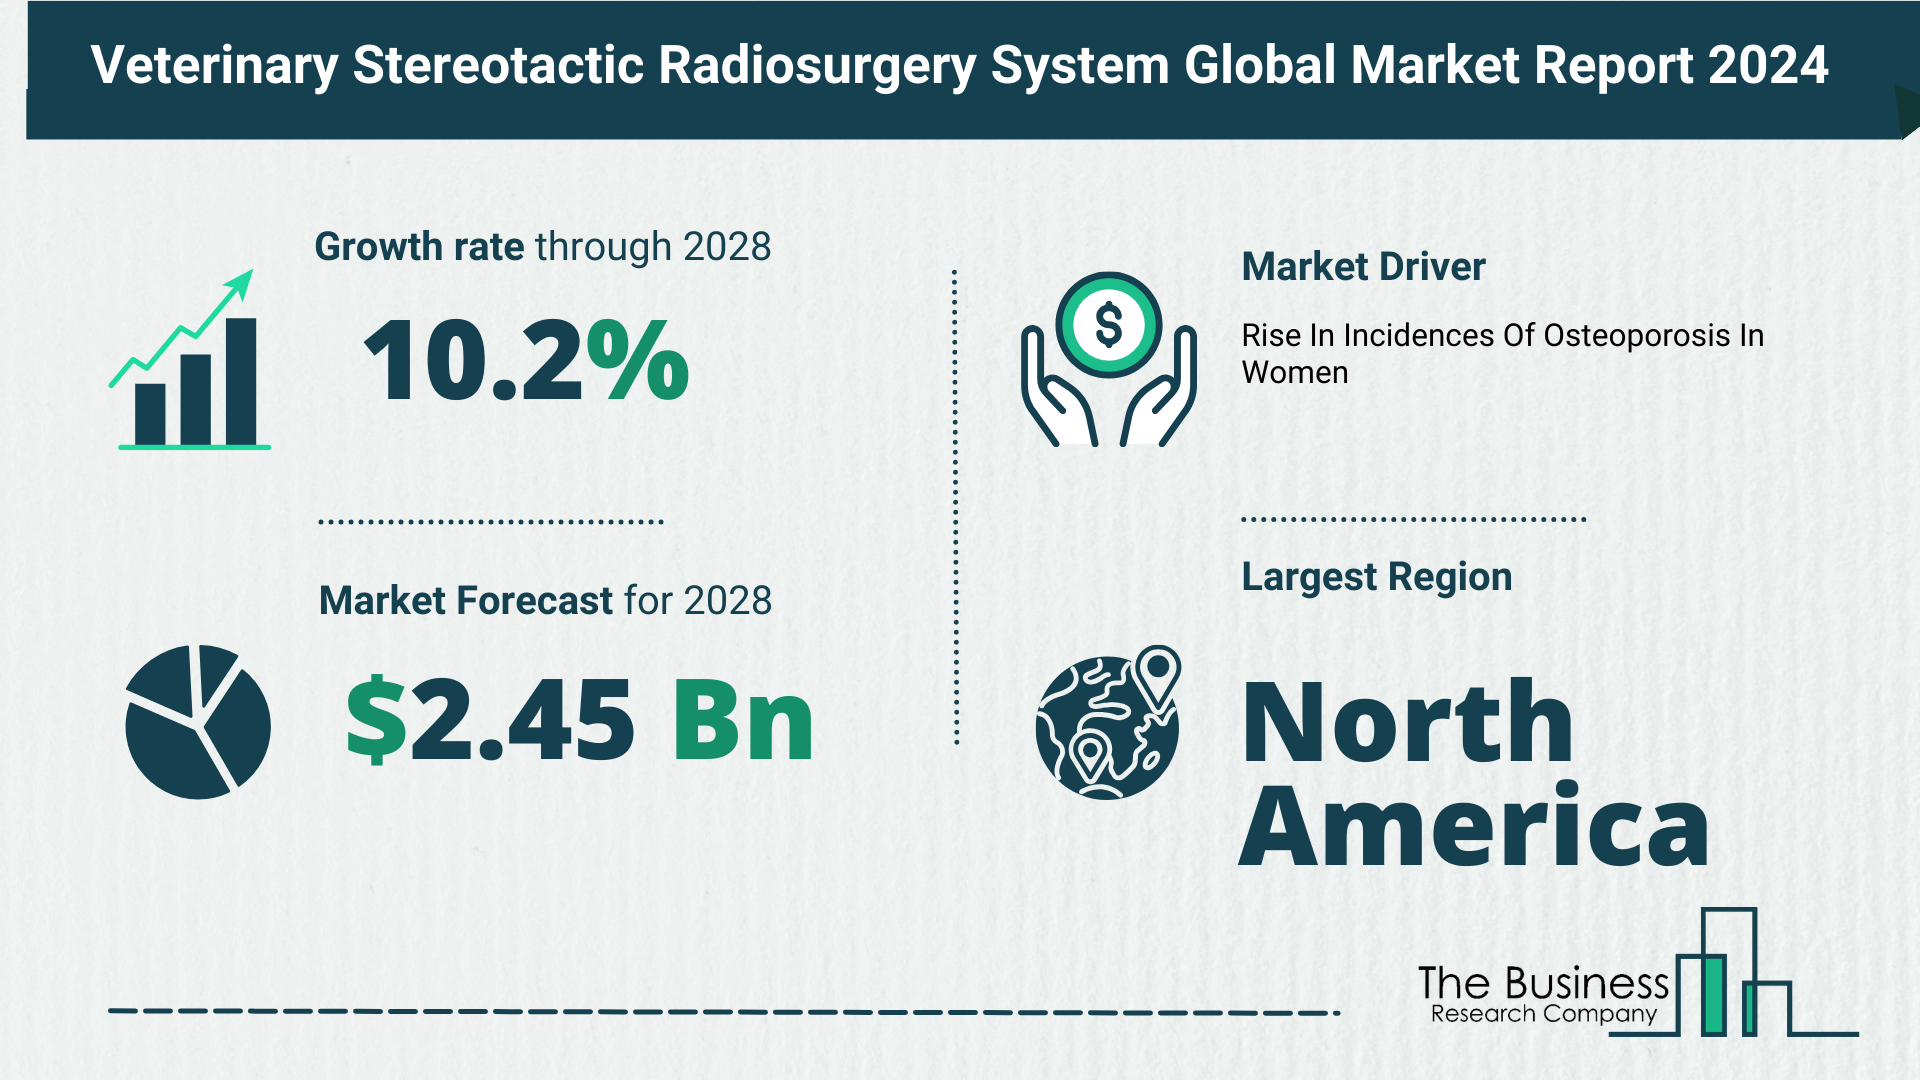 Global Veterinary Stereotactic Radiosurgery System Market